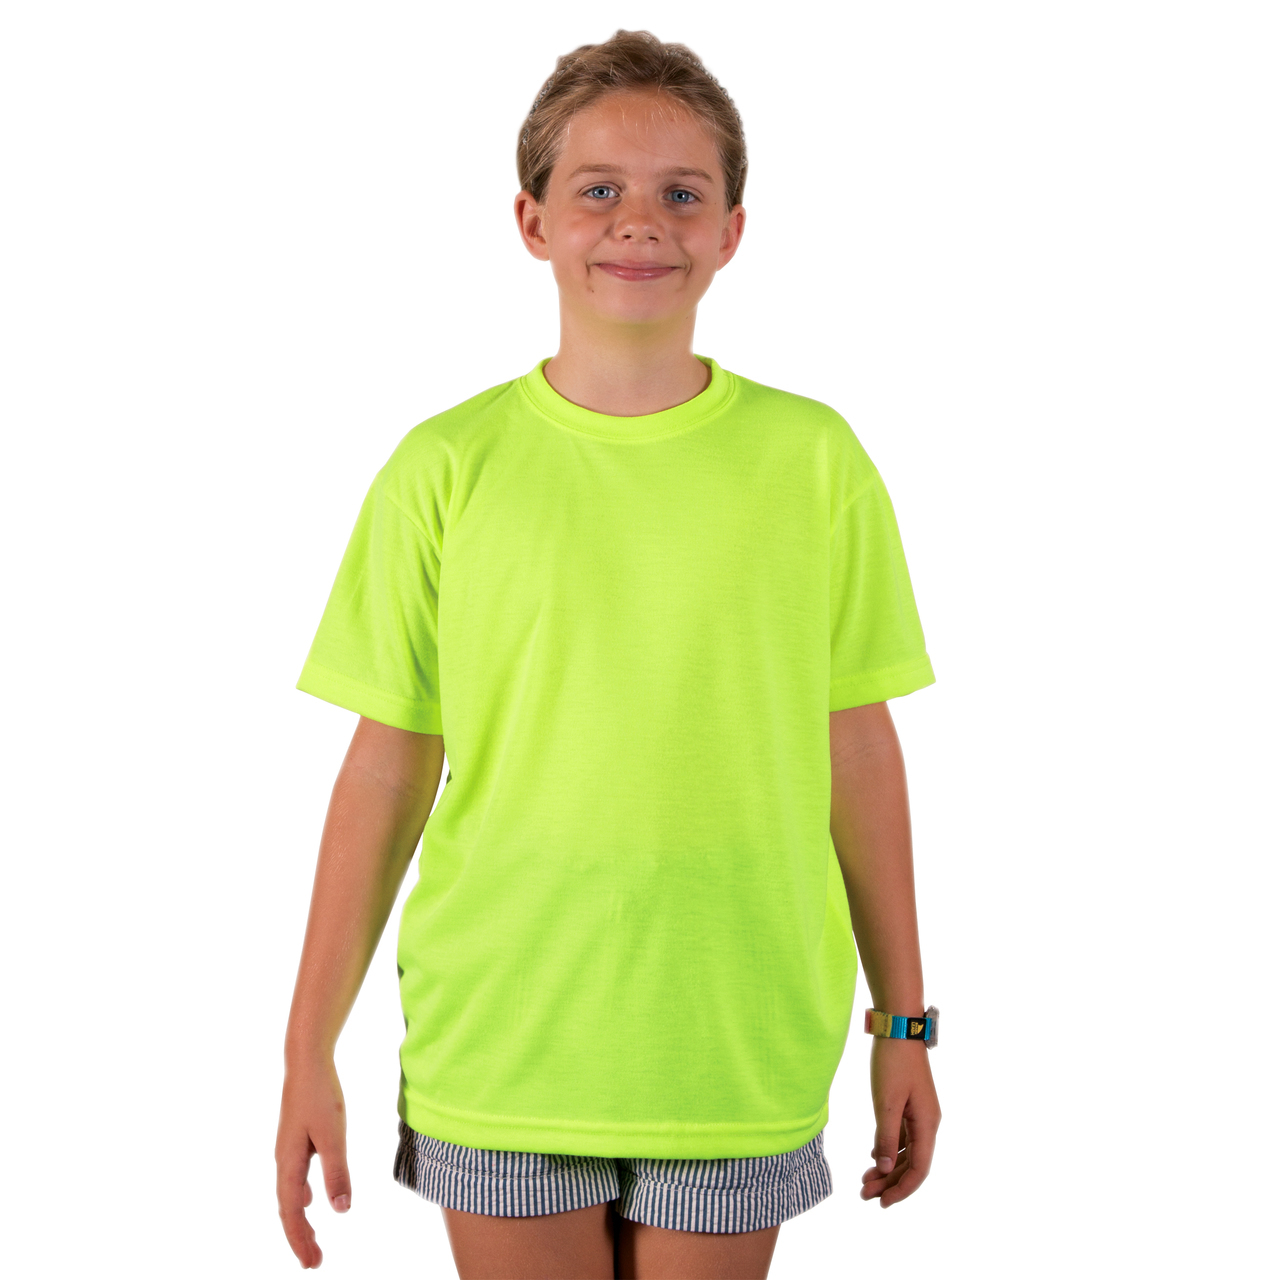 Kids' sublimation T-shirt with colour sleeves Basic weight: 140 g/m² Size:  8 years Colour: white and red